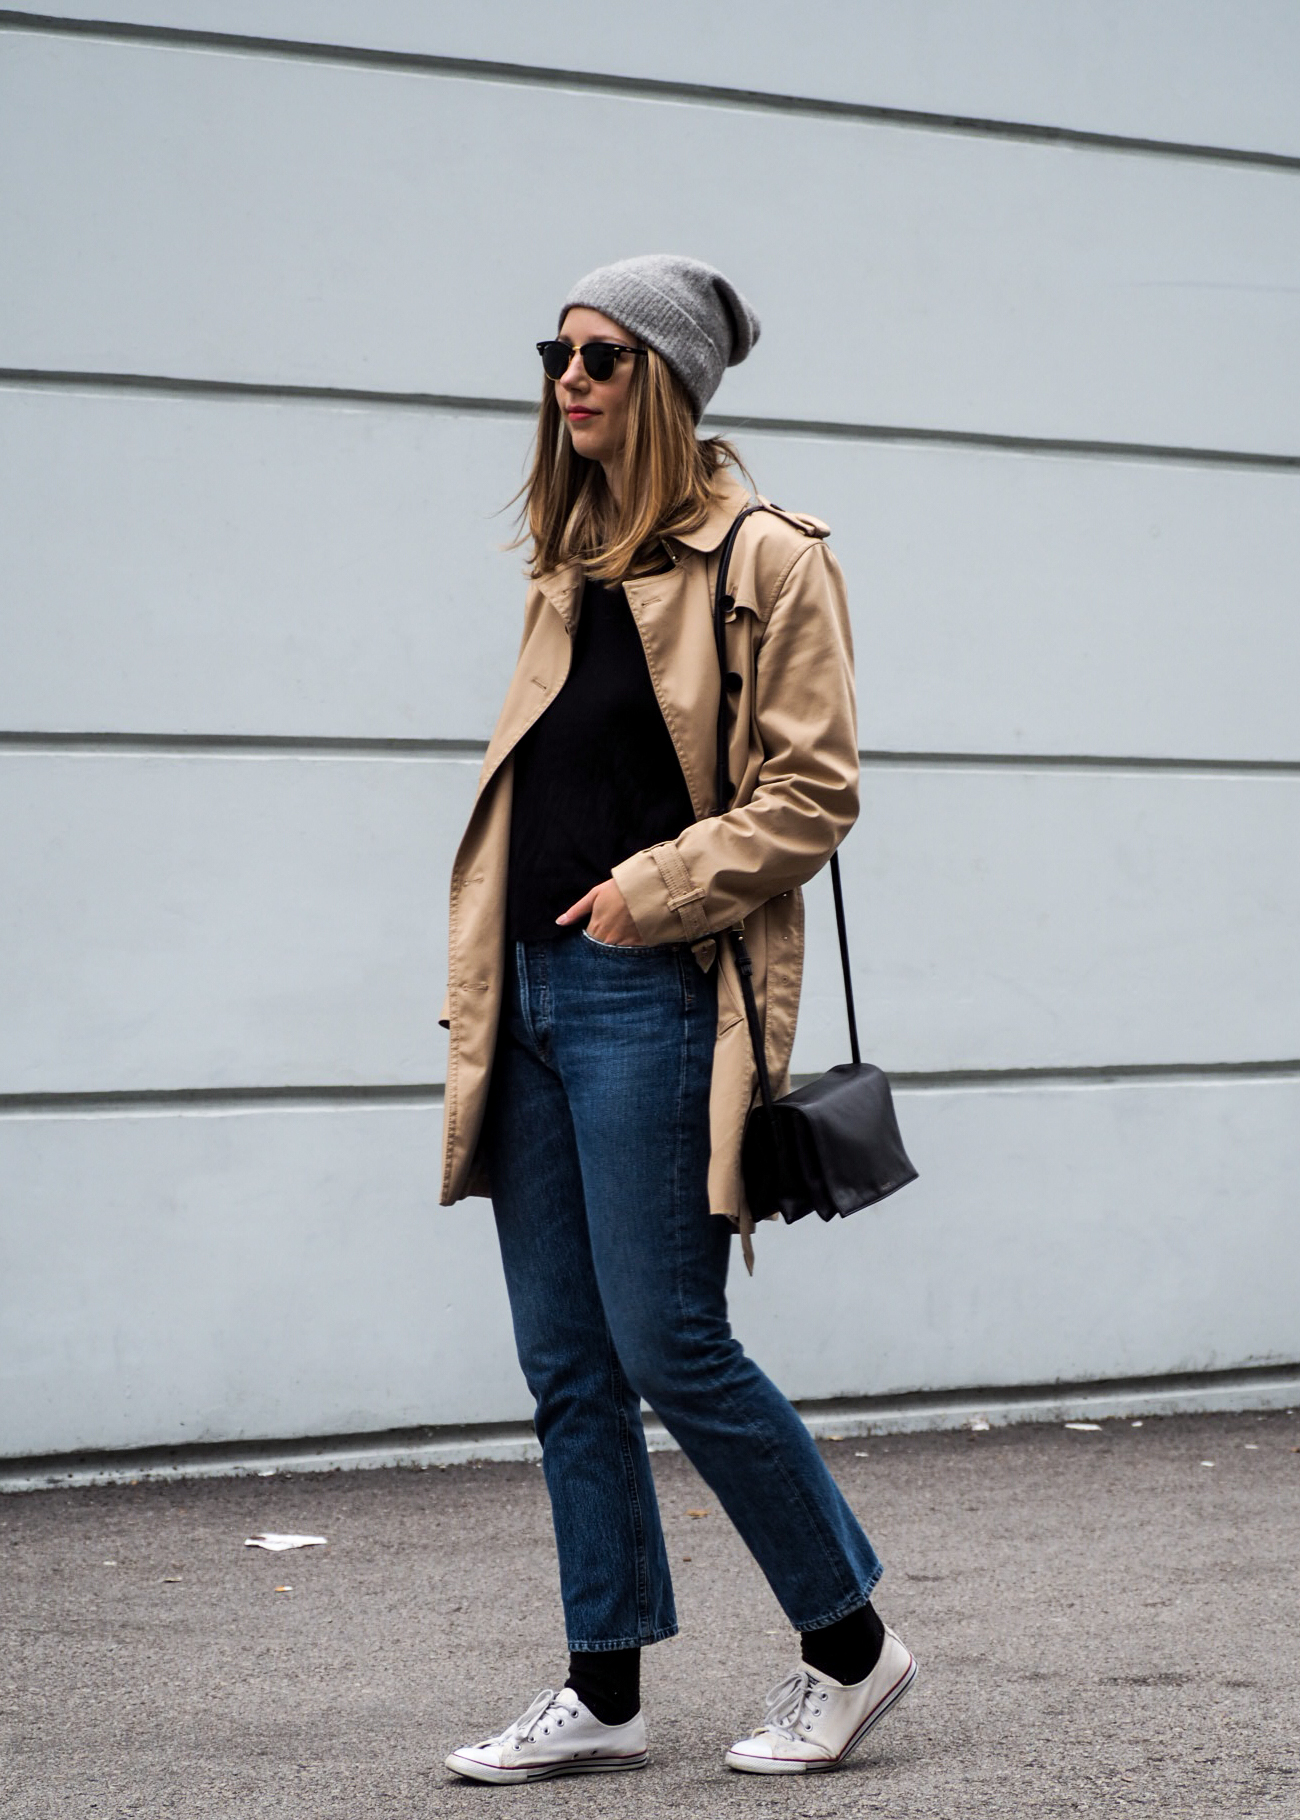 Fall Outfit Inspiration: An Old Fast Fashion Favourite